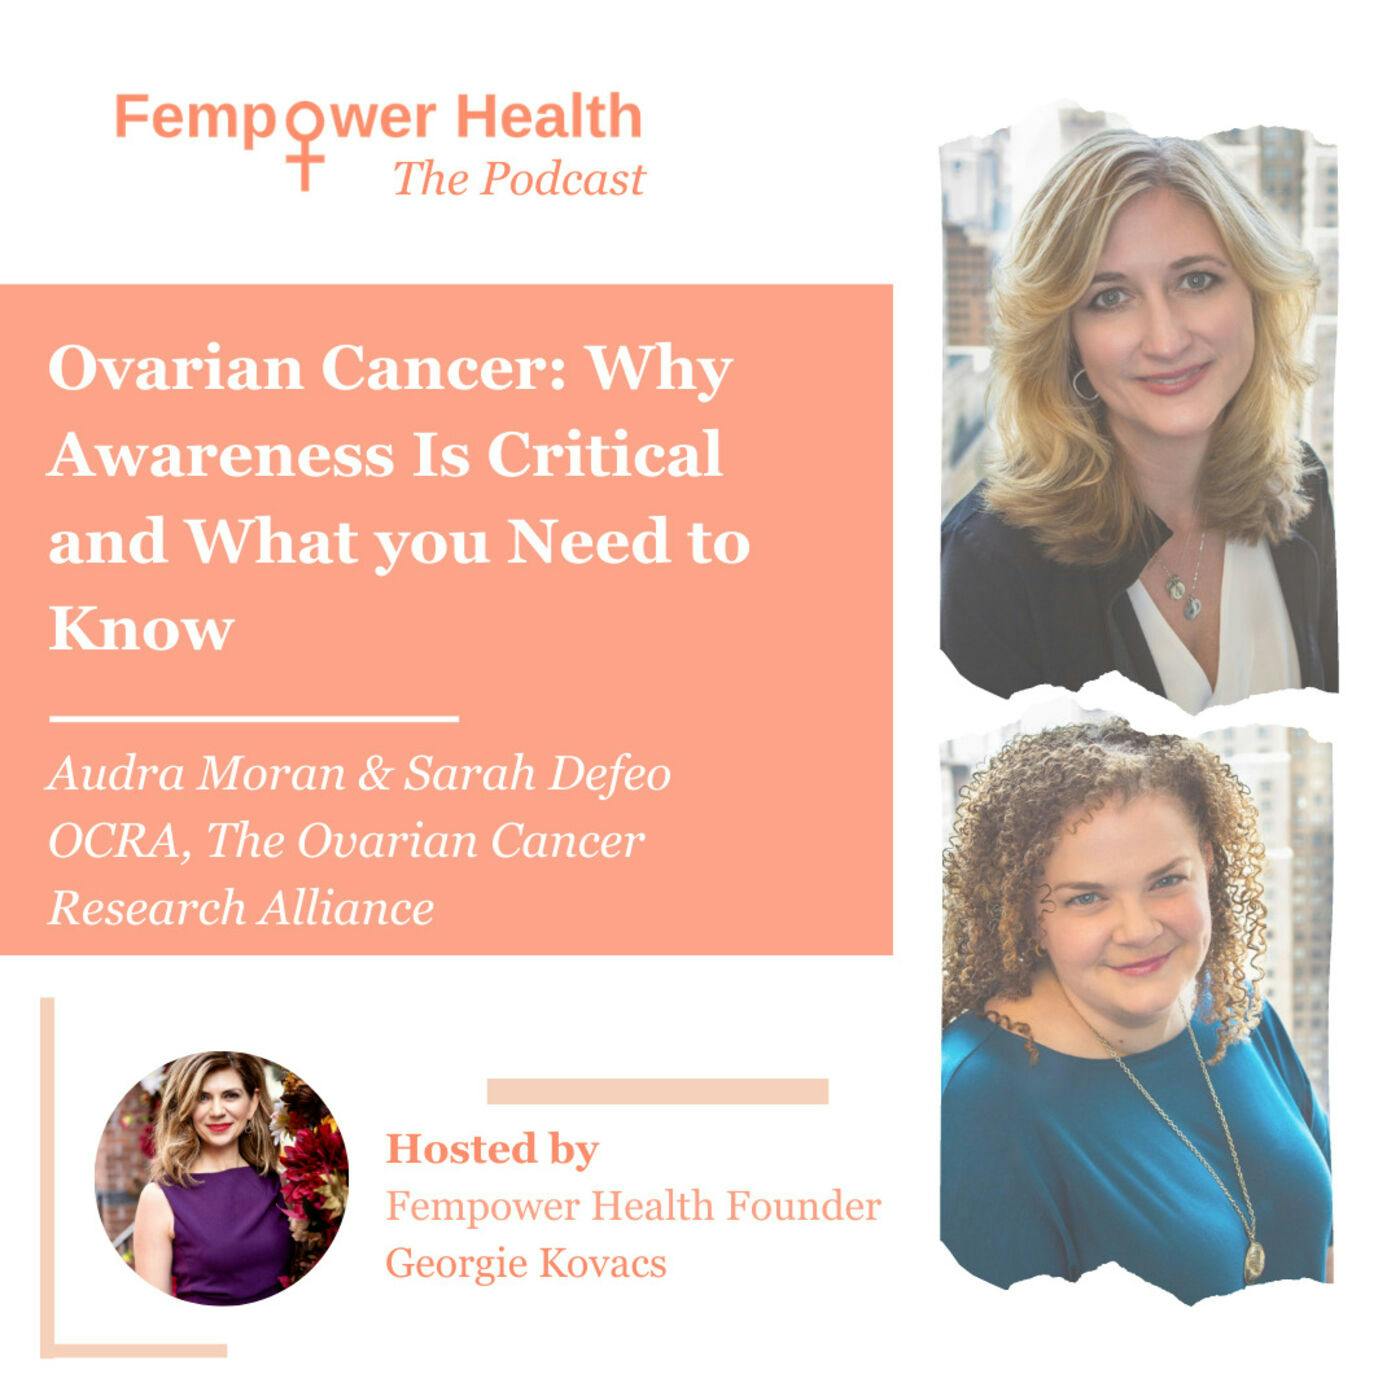 Ovarian Cancer Research Alliance (OCRA) | Ovarian Cancer:  Why Awareness Is Critical and What you Need to Know